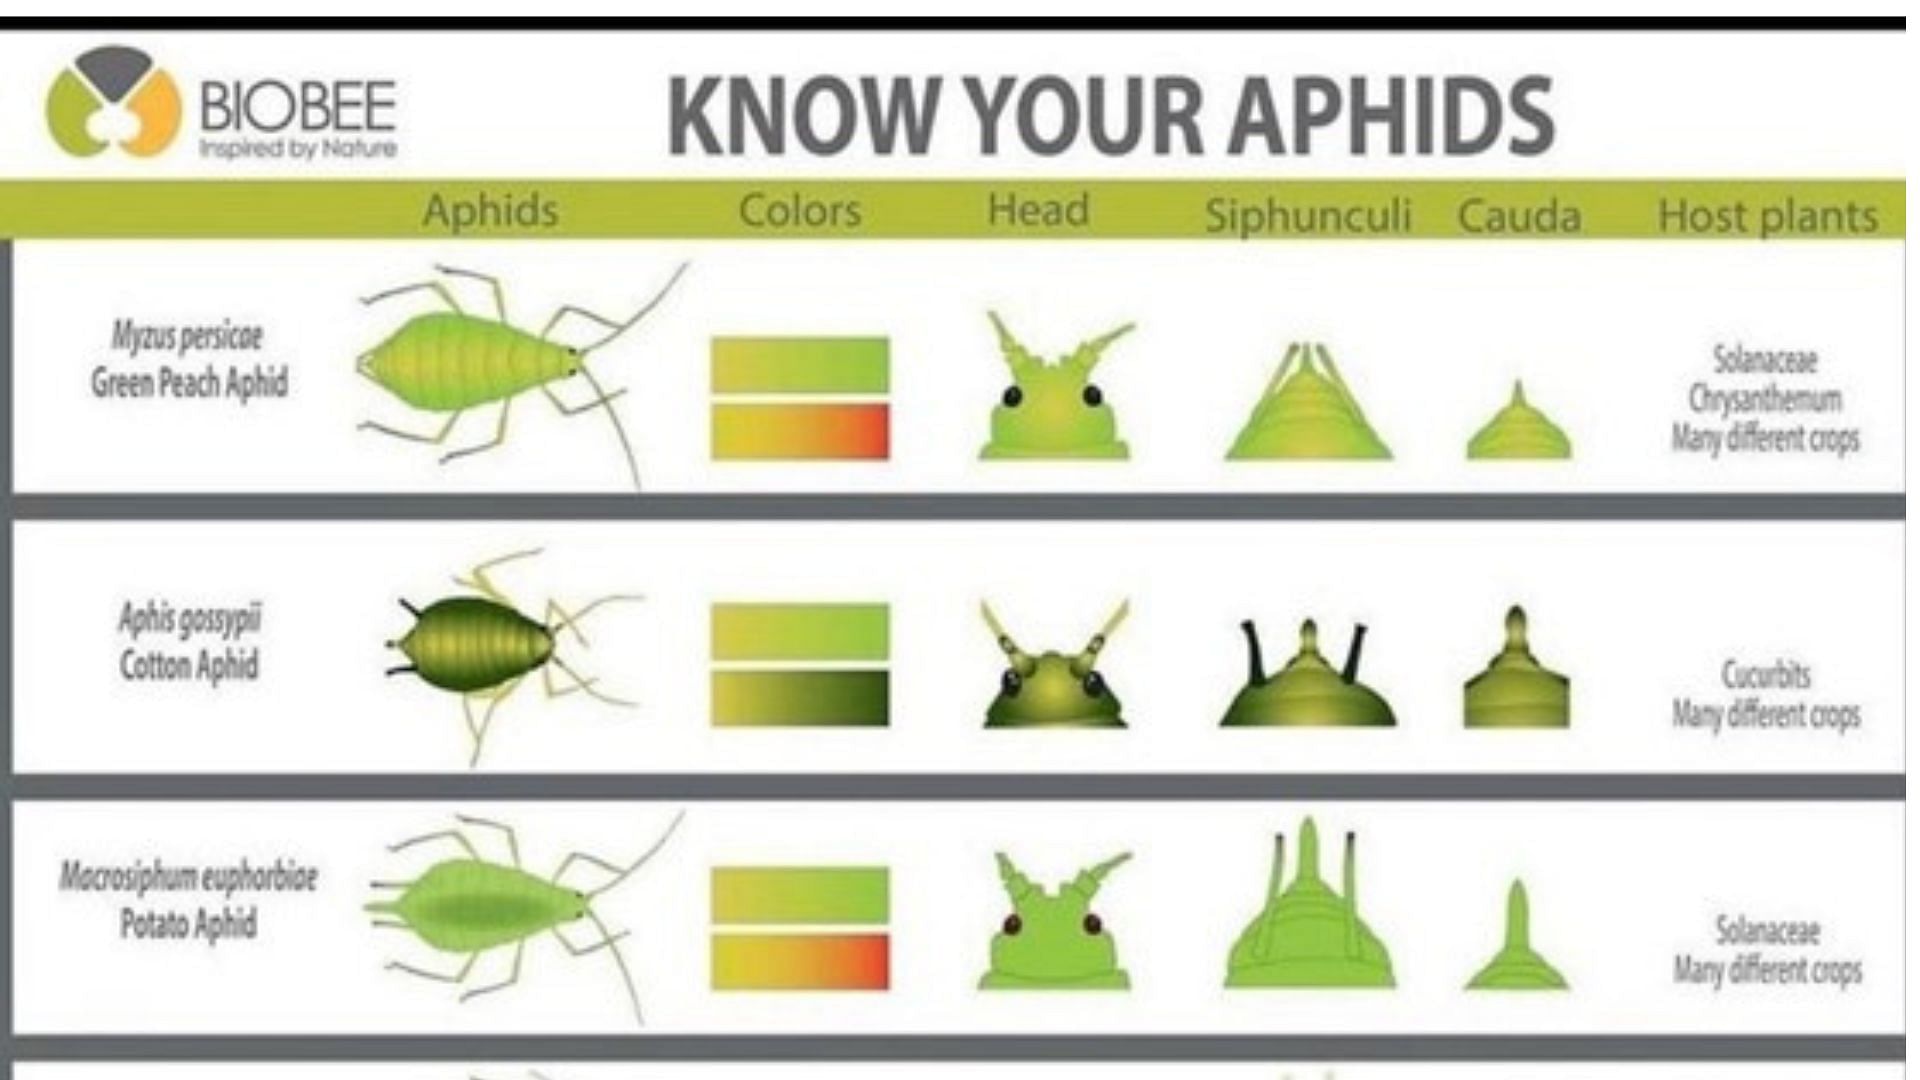 identify the key types of aphids which attack cannabis plants